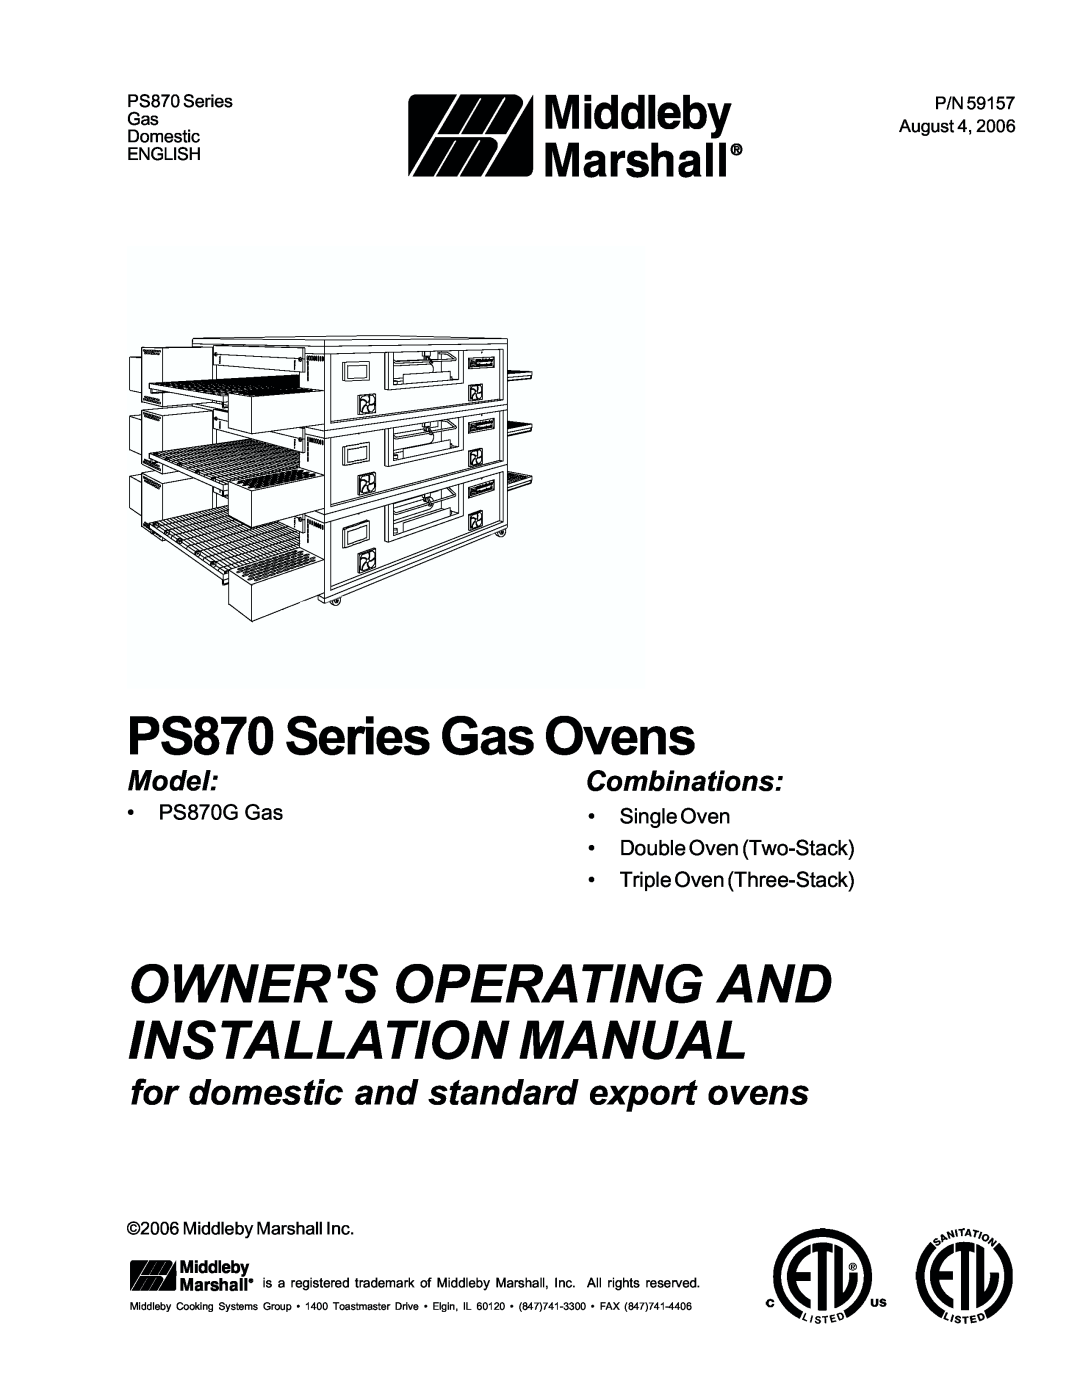 Middleby Cooking Systems Group manual PS870 Series Gas Ovens, Owners Operating And Installation Manual, Model 